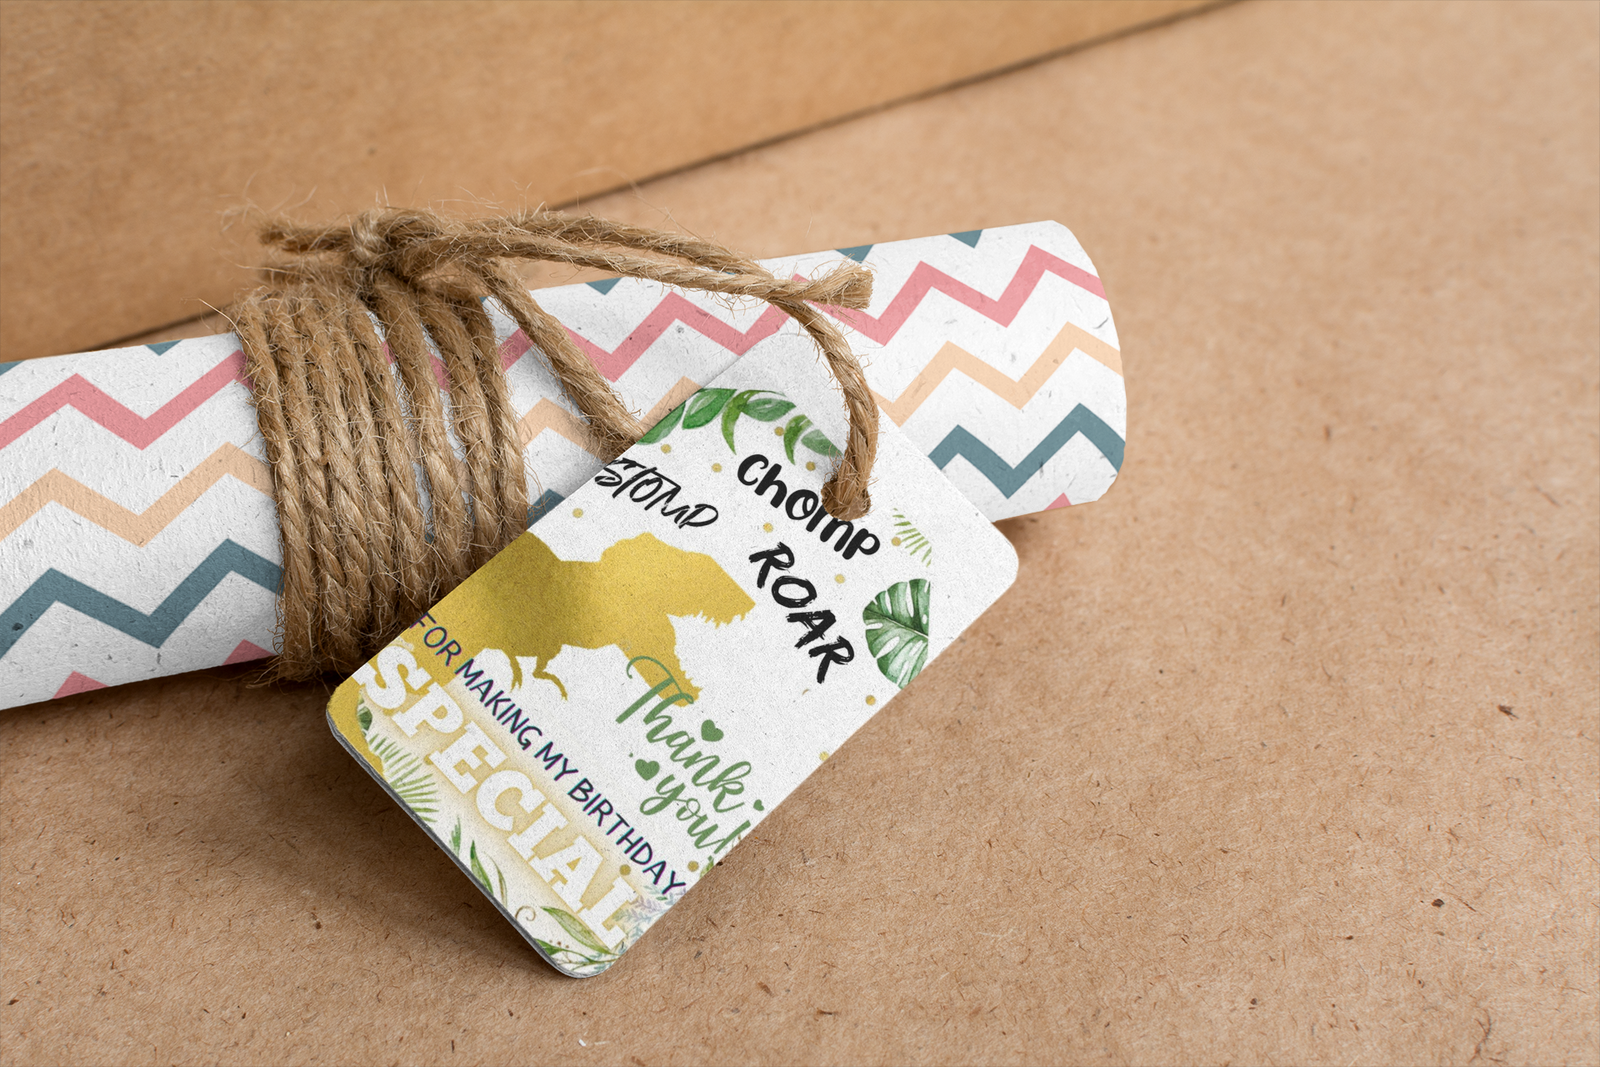 Dinosaur Theme Model 2 Birthday Favour Tags (2 x 3.5 inches/250 GSM Cardstock/Multicolour/30Pcs)